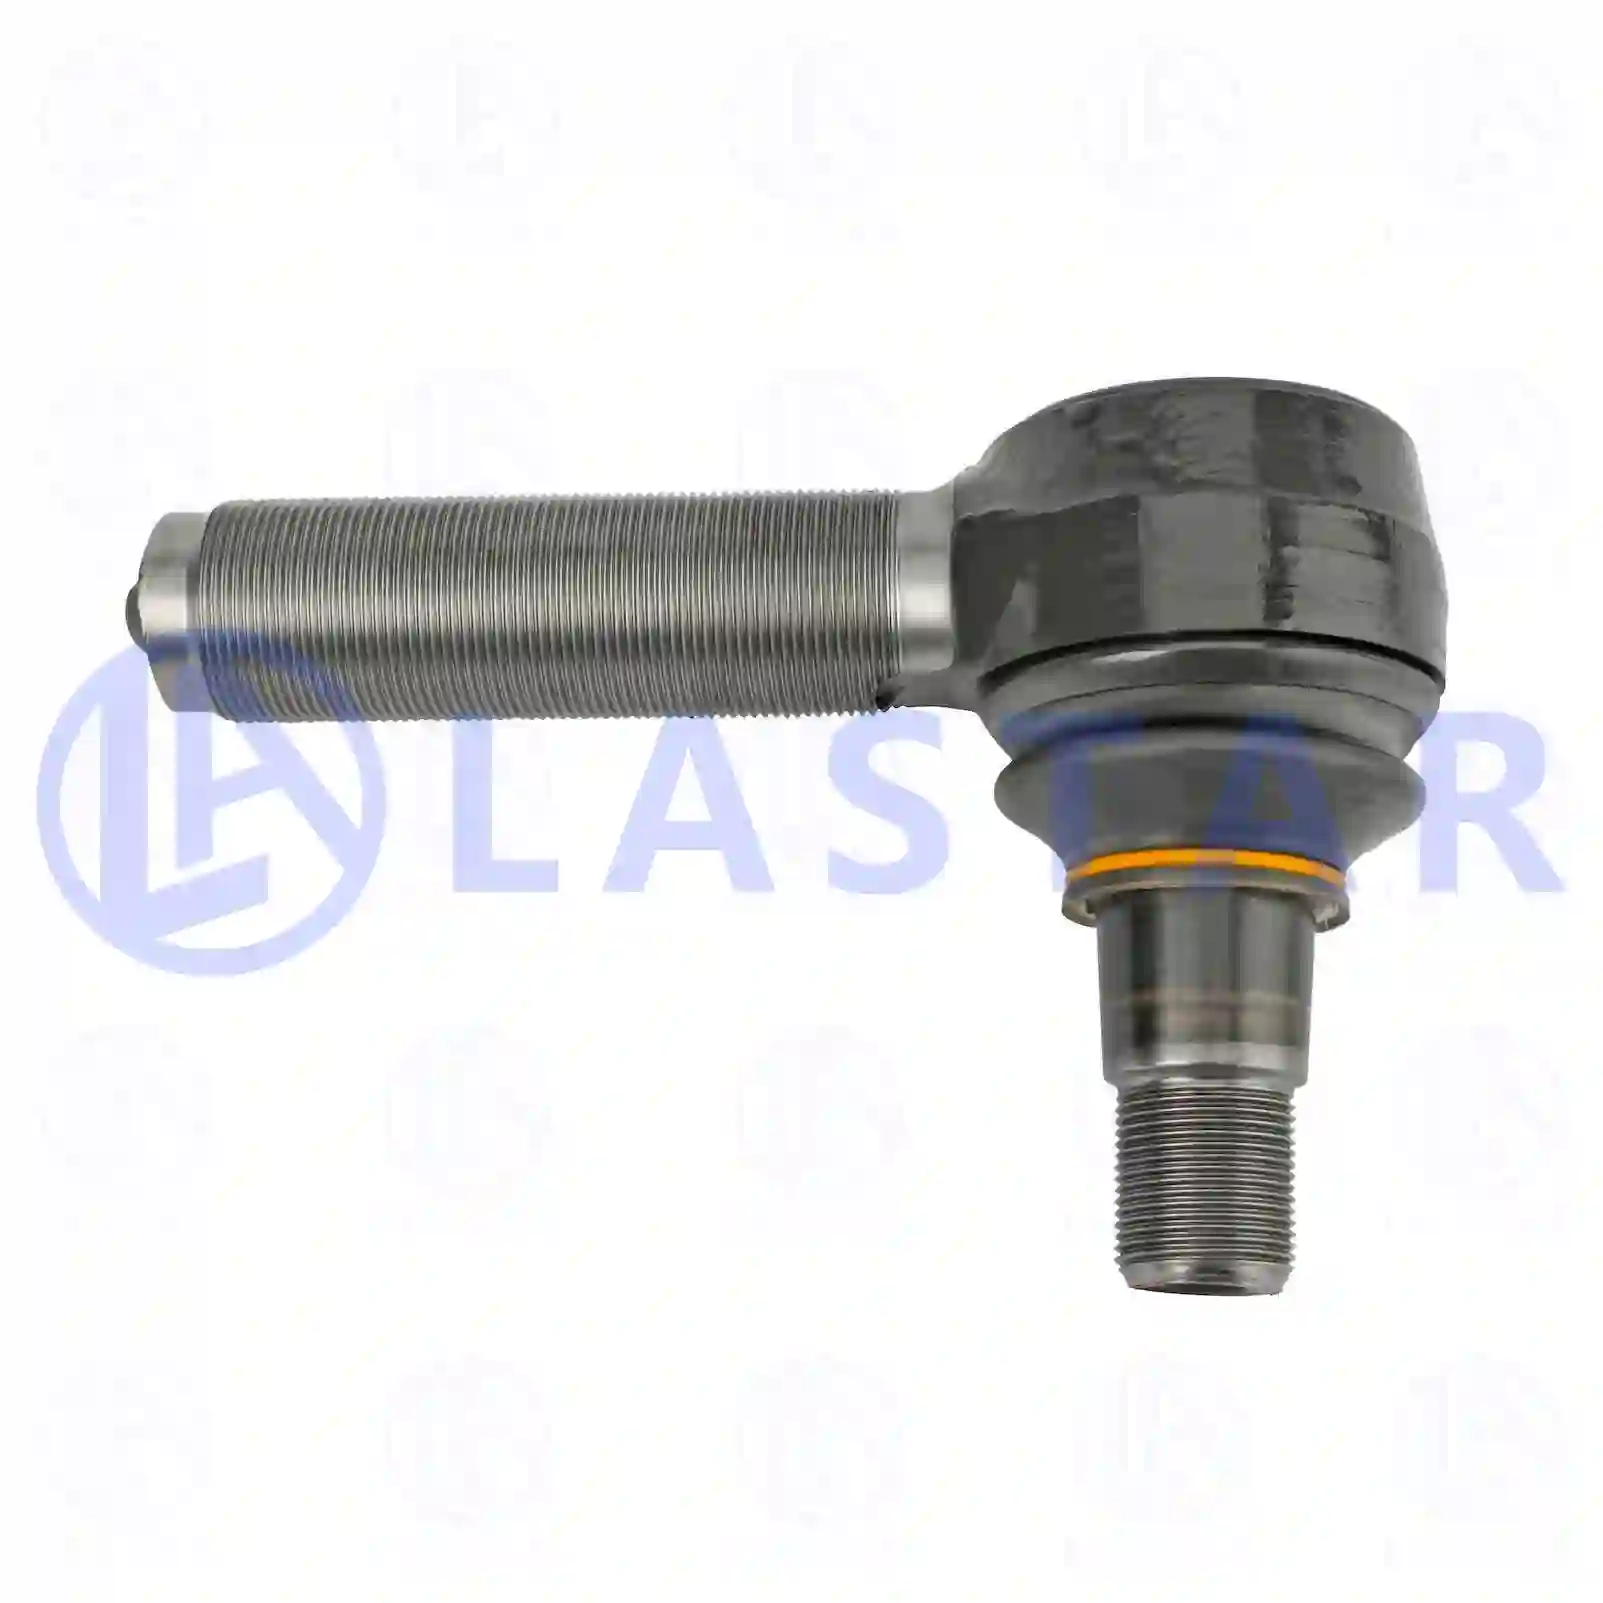 Ball joint, right hand thread, 77705109, 0014607248, 5001866165, 5001867774, ZG40405-0008, ||  77705109 Lastar Spare Part | Truck Spare Parts, Auotomotive Spare Parts Ball joint, right hand thread, 77705109, 0014607248, 5001866165, 5001867774, ZG40405-0008, ||  77705109 Lastar Spare Part | Truck Spare Parts, Auotomotive Spare Parts